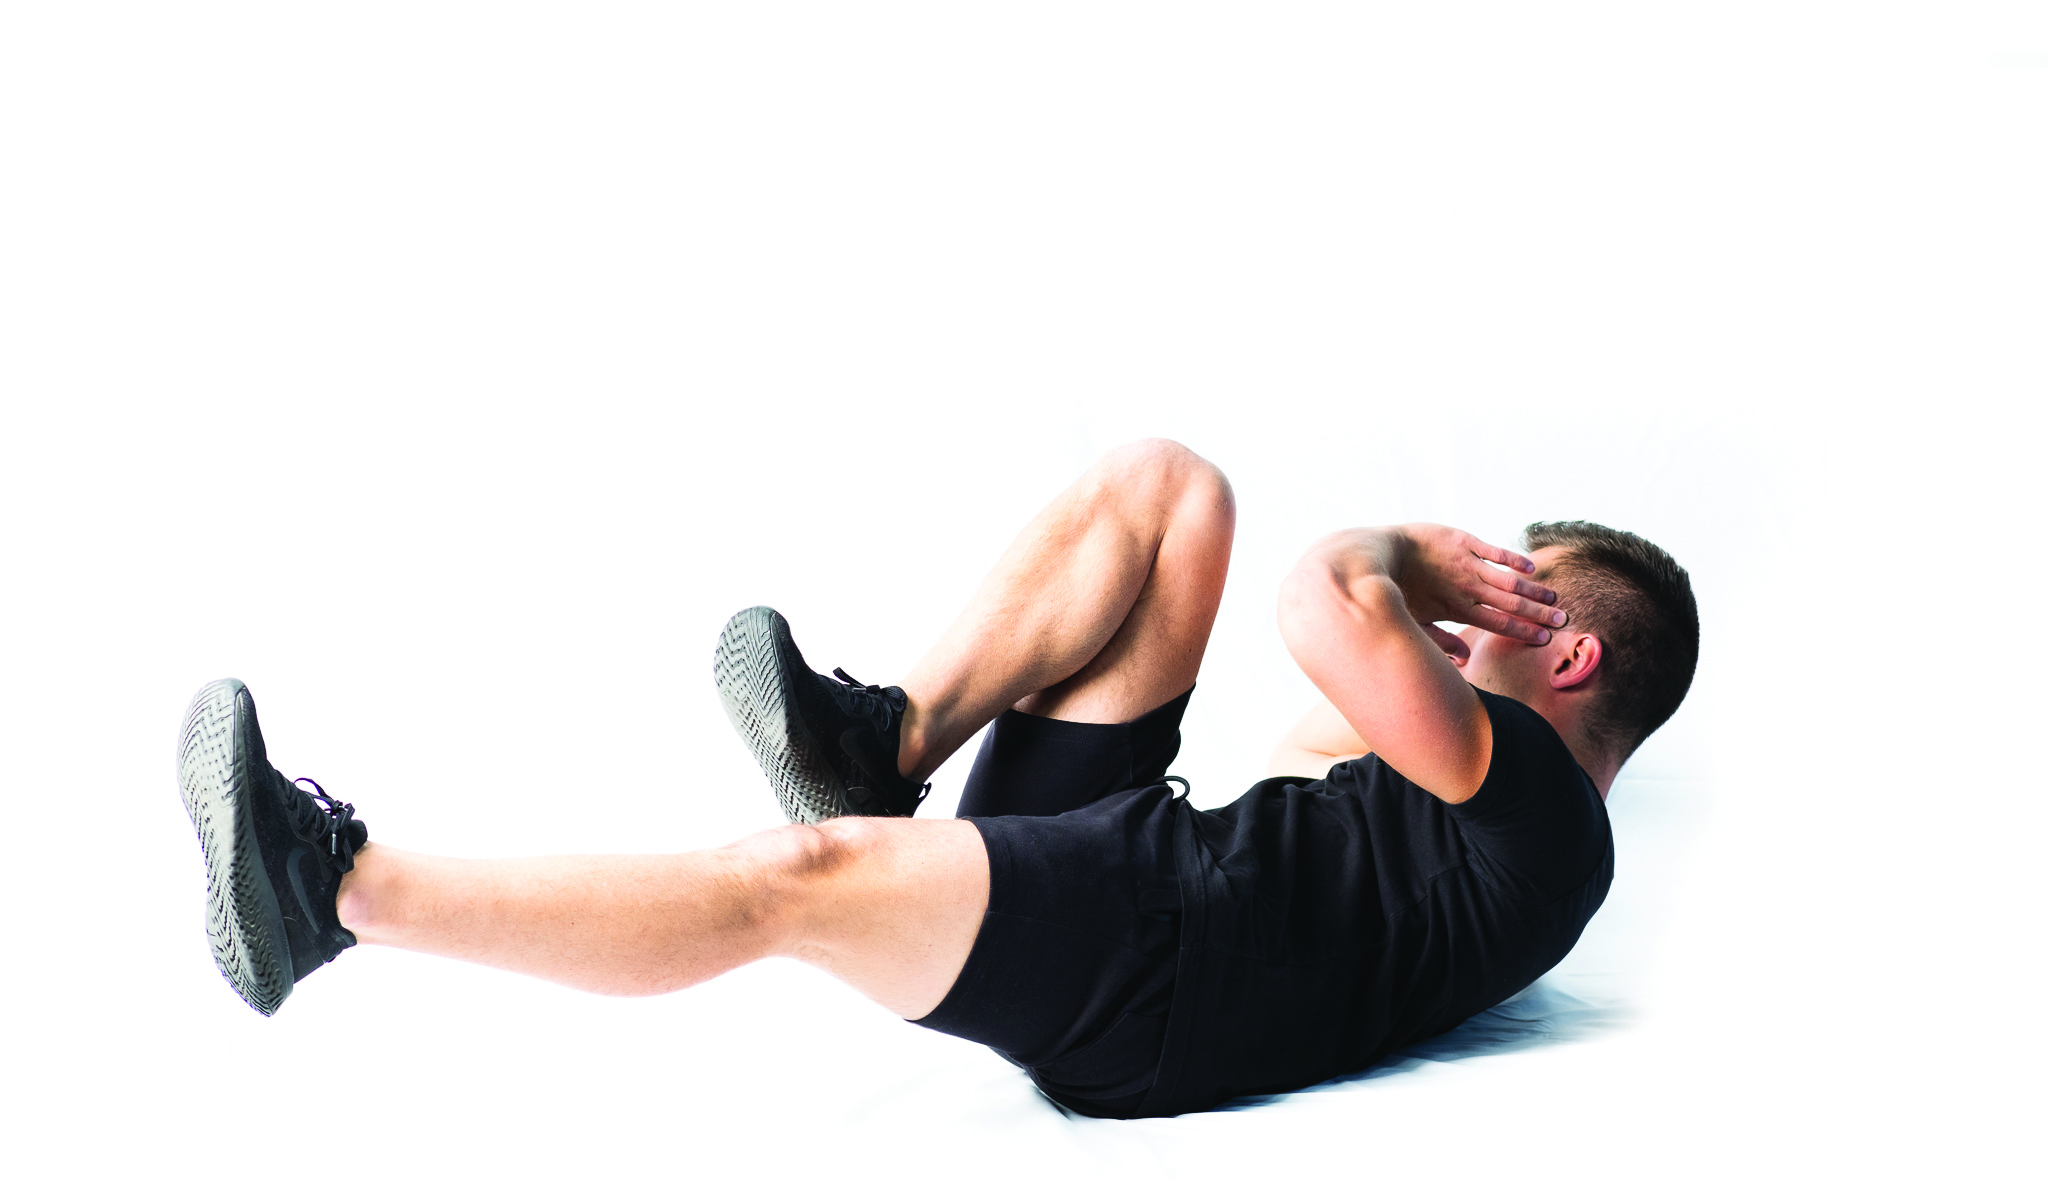 Tone Your Stomach With This High Rep Abs Workout | Men's Fitness UK